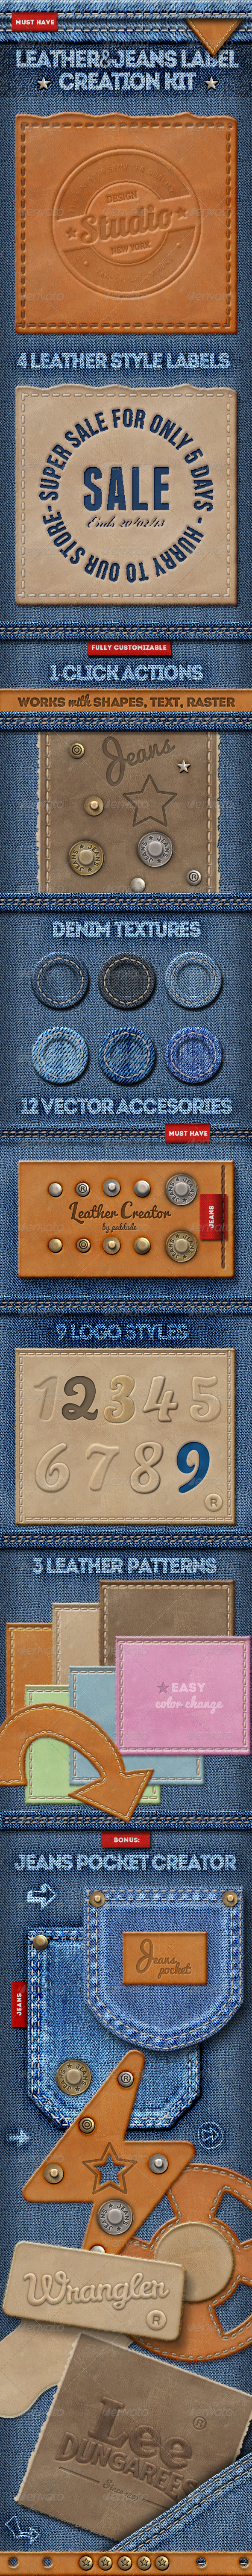 01 main preview leather jeans label photoshop creator